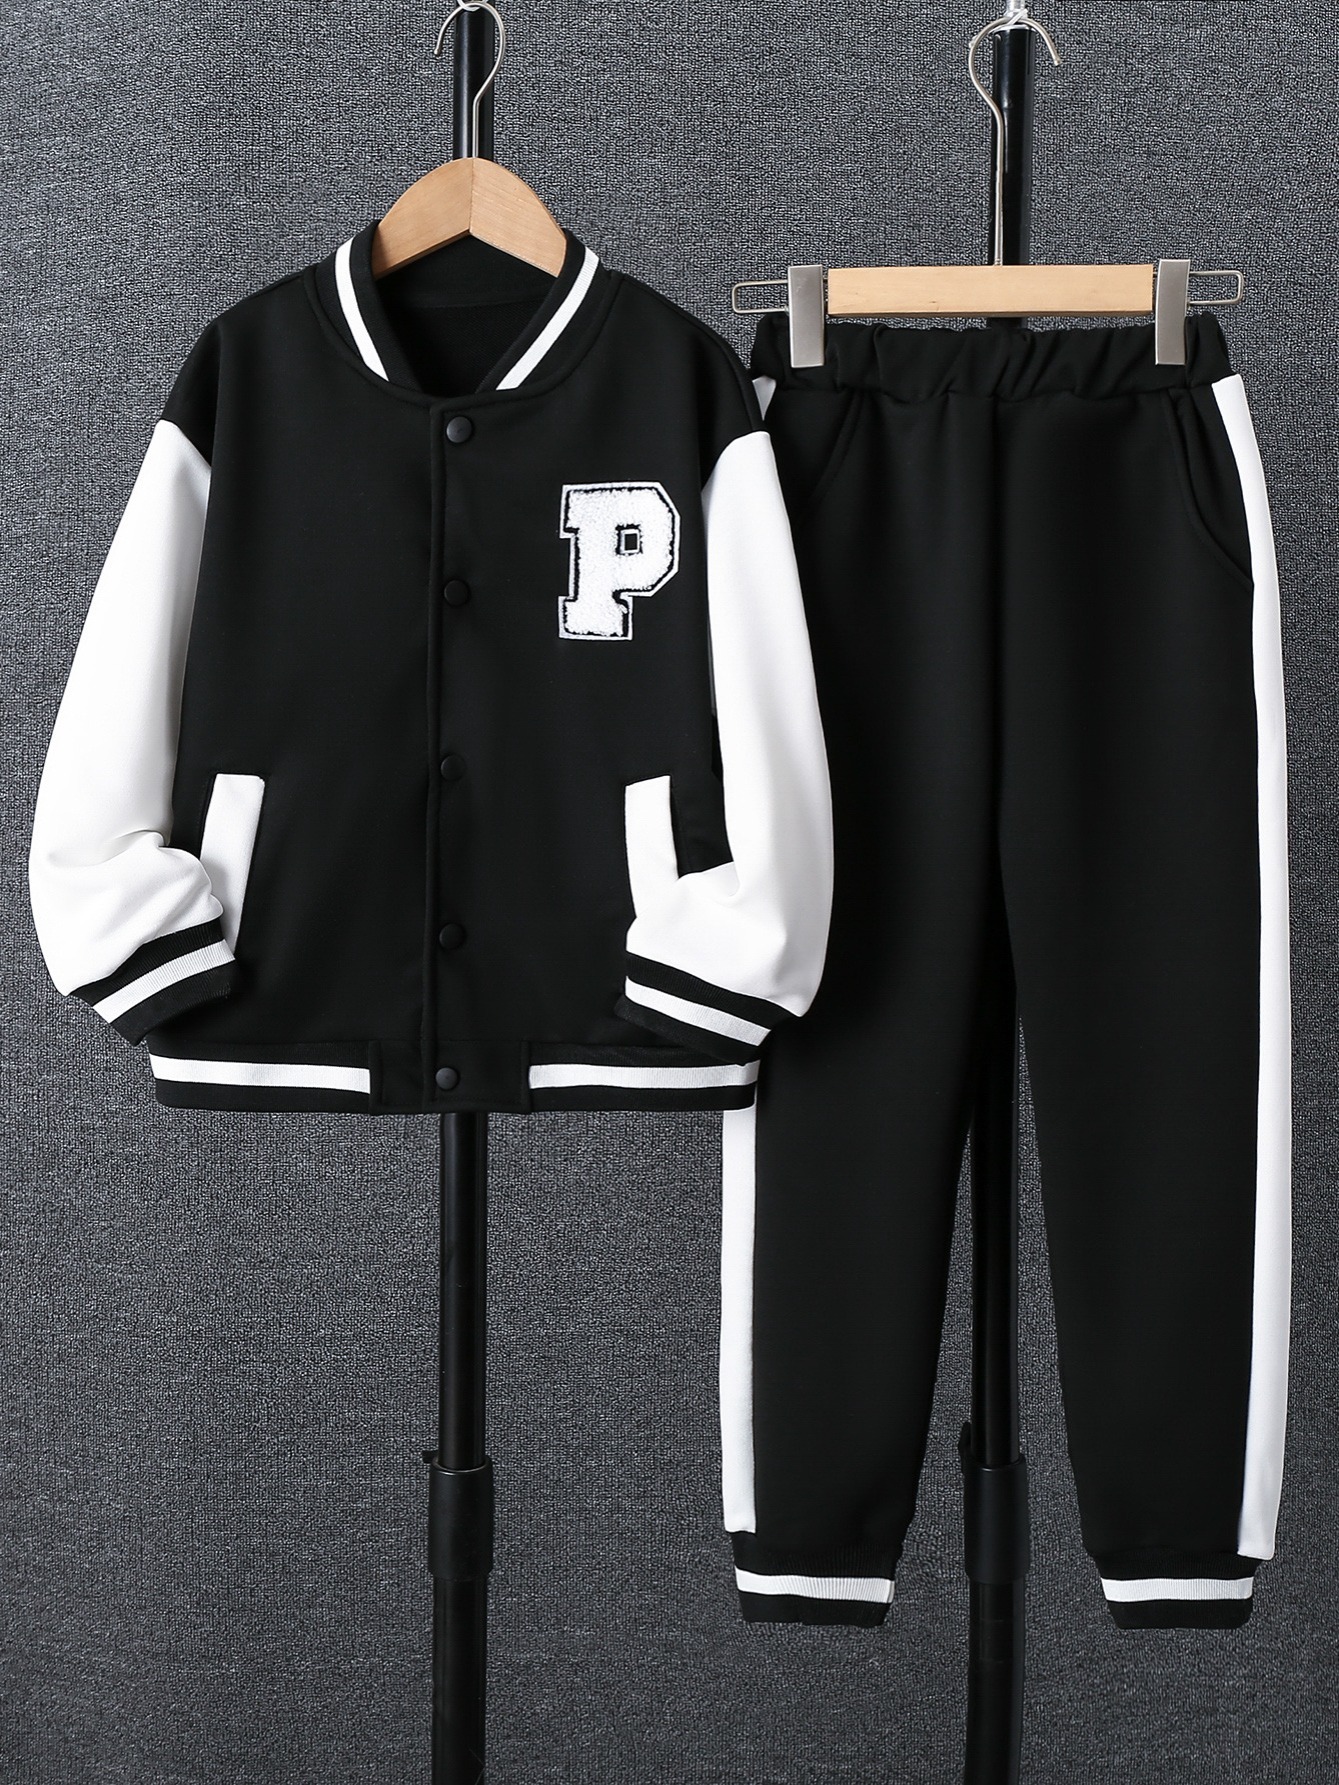 Temu 2pcs Boy's Varsity Jacket Outfit, Zipper Bomber Jacket & Sweatpants Set, Letter Patched Long Sleeve Coat, Kid's Clothes for Spring Fall, Christmas